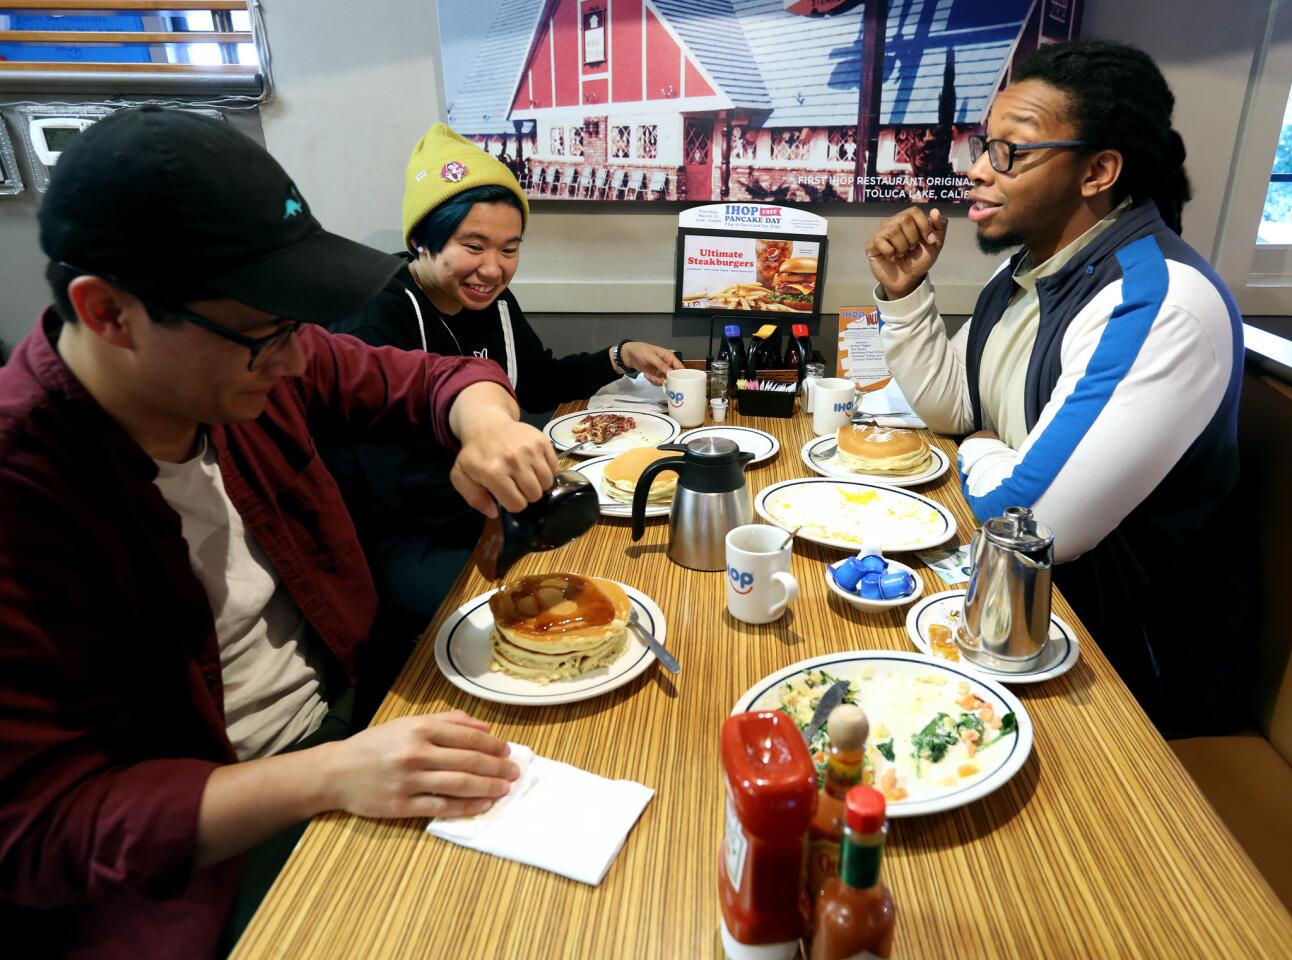 Lester Knight, 28, pours syrup on his free pancakes while having breakfast with friends Gizelle Orbino, 31, center, and Melvin Young, 31, all from Burbank, during the IHOP free pancake day, at the location on San Fernando Rd, in Burbank on Tuesday, March 12, 2019.